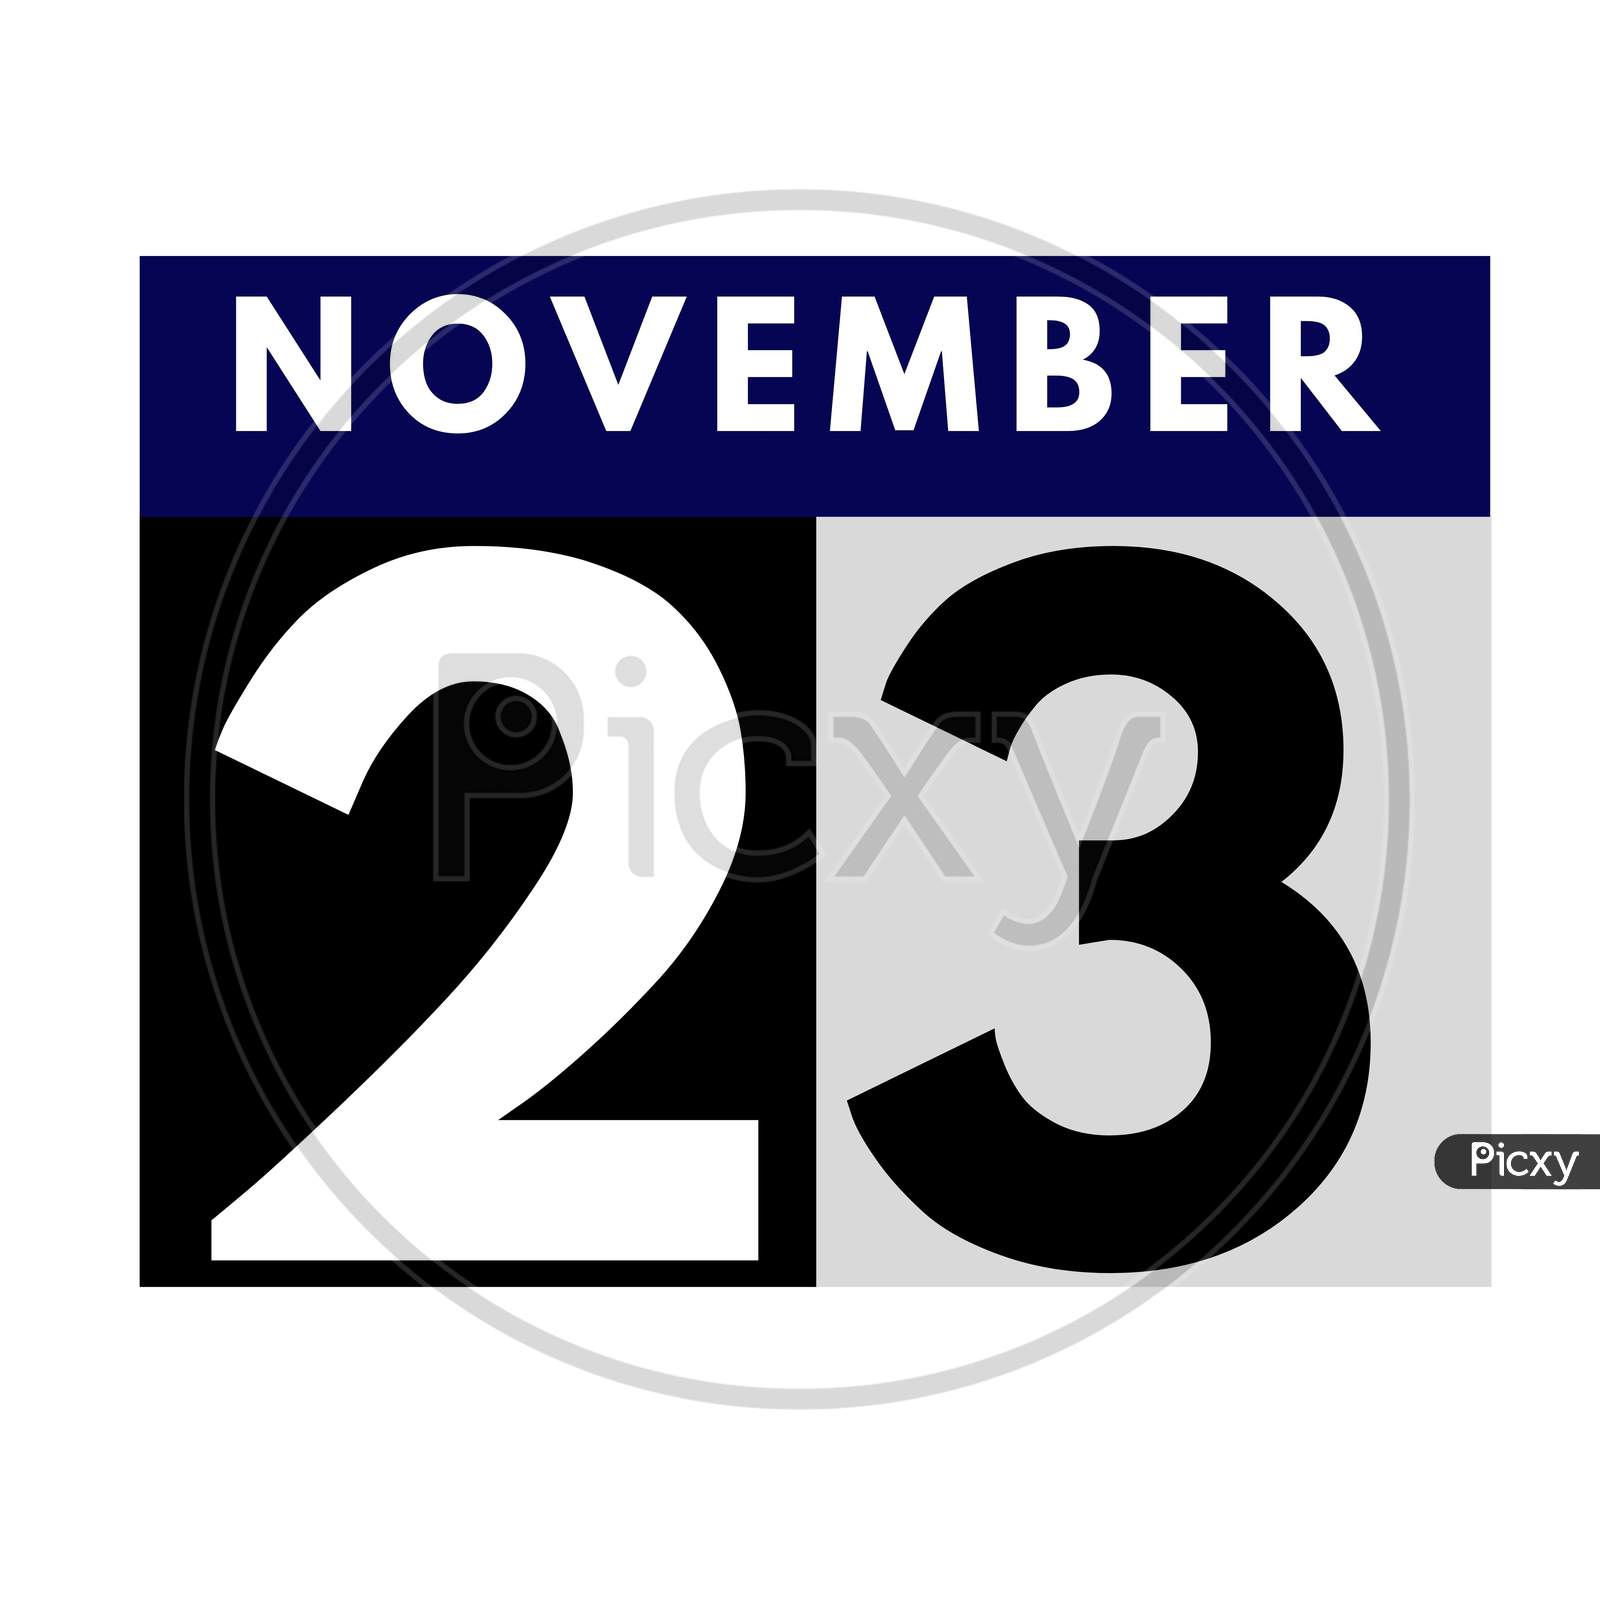 November 23 . Flat Daily Calendar Icon .Date ,Day, Month .Calendar For The Month Of November